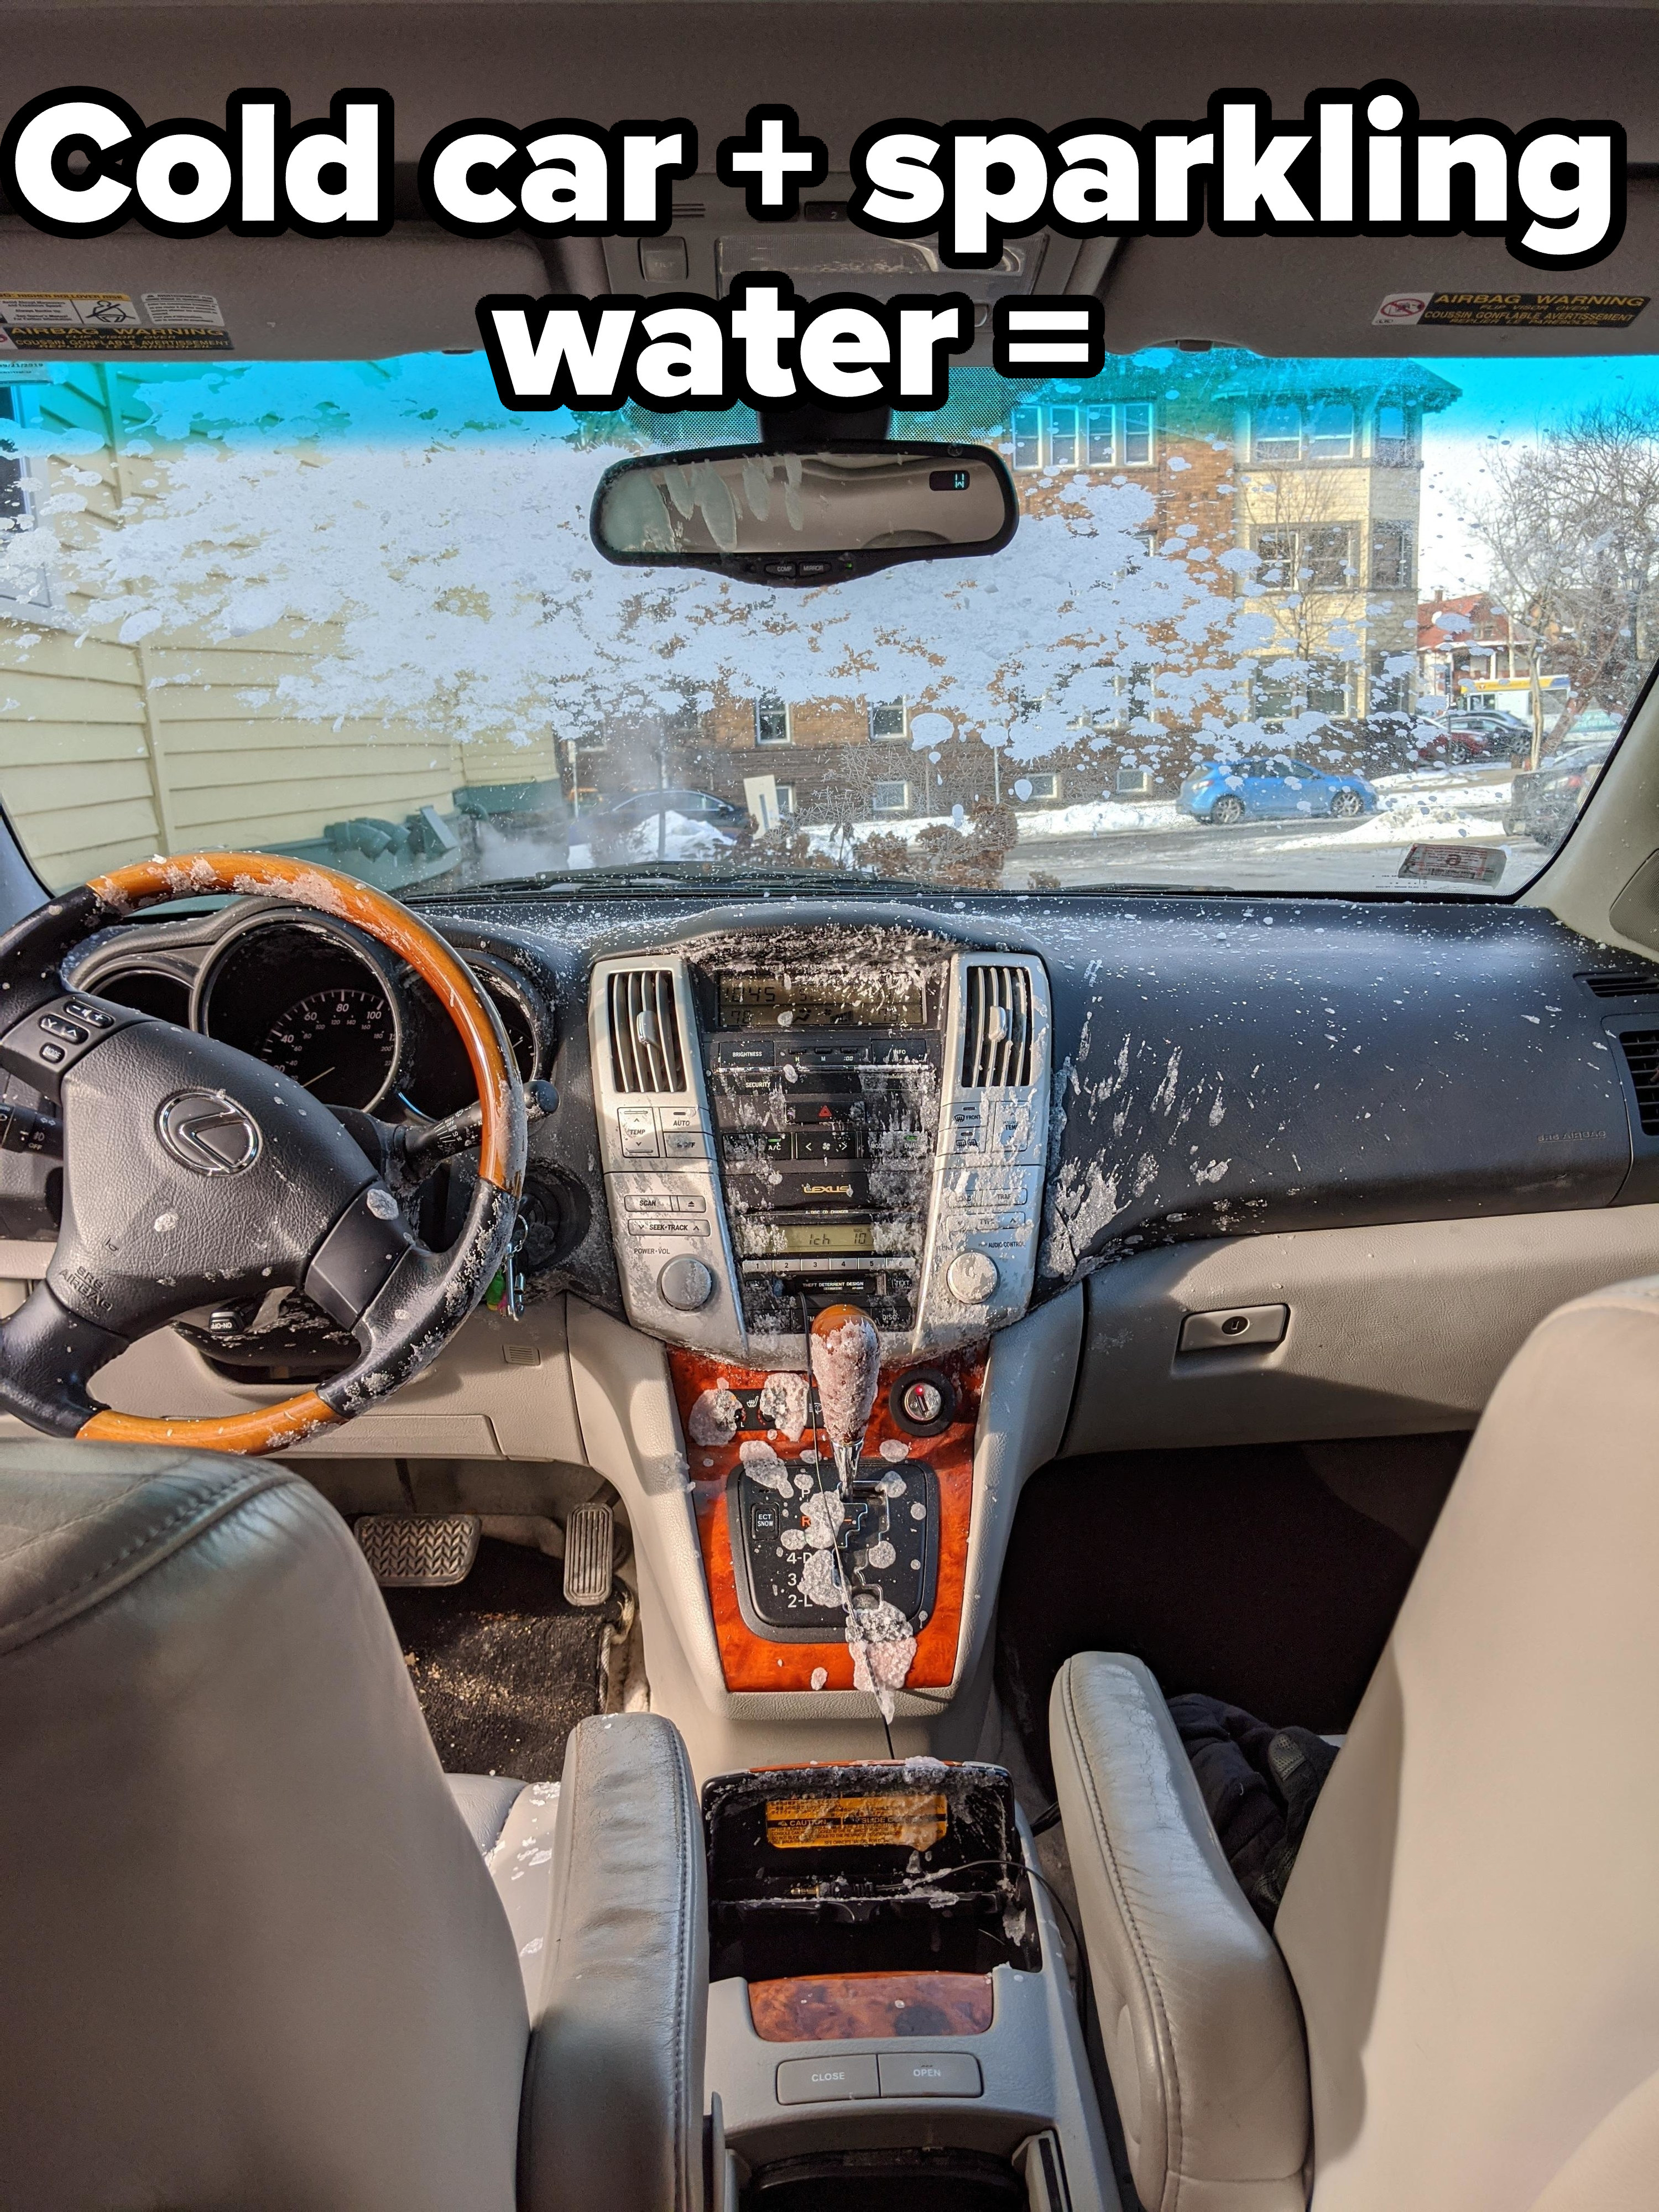 Frozen spattered water in a car